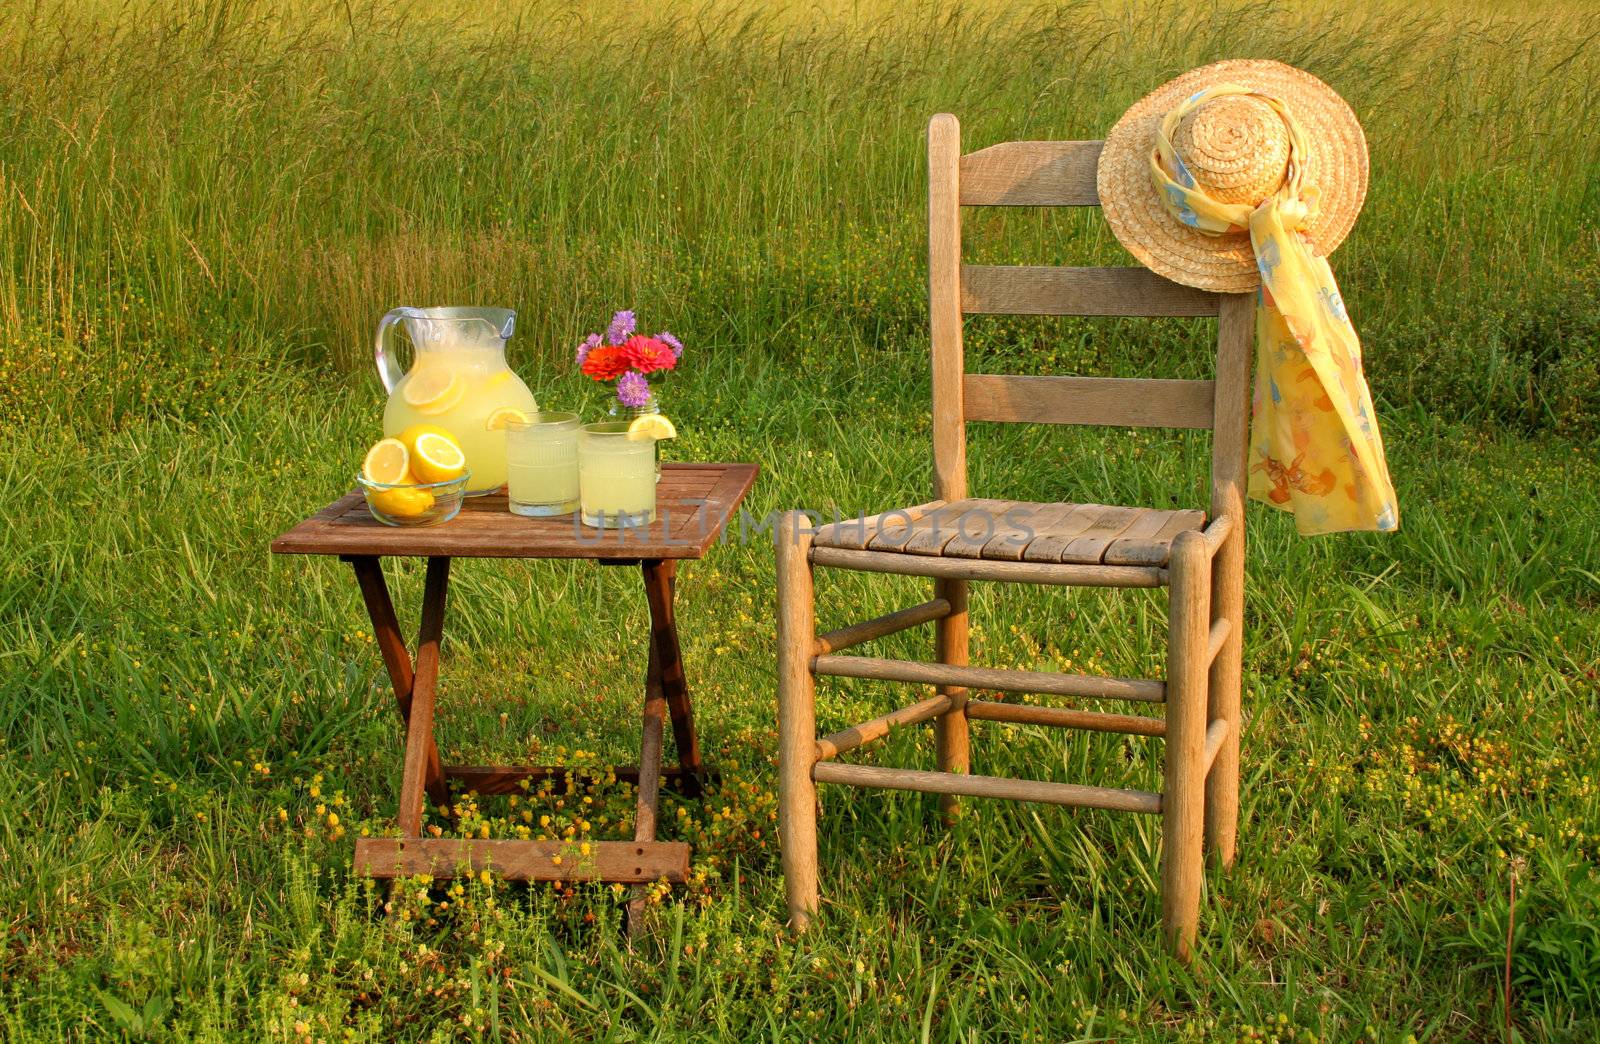 lemonade, fresh flowers and empty chair with a womans hat all outside on a beautiful summers day.